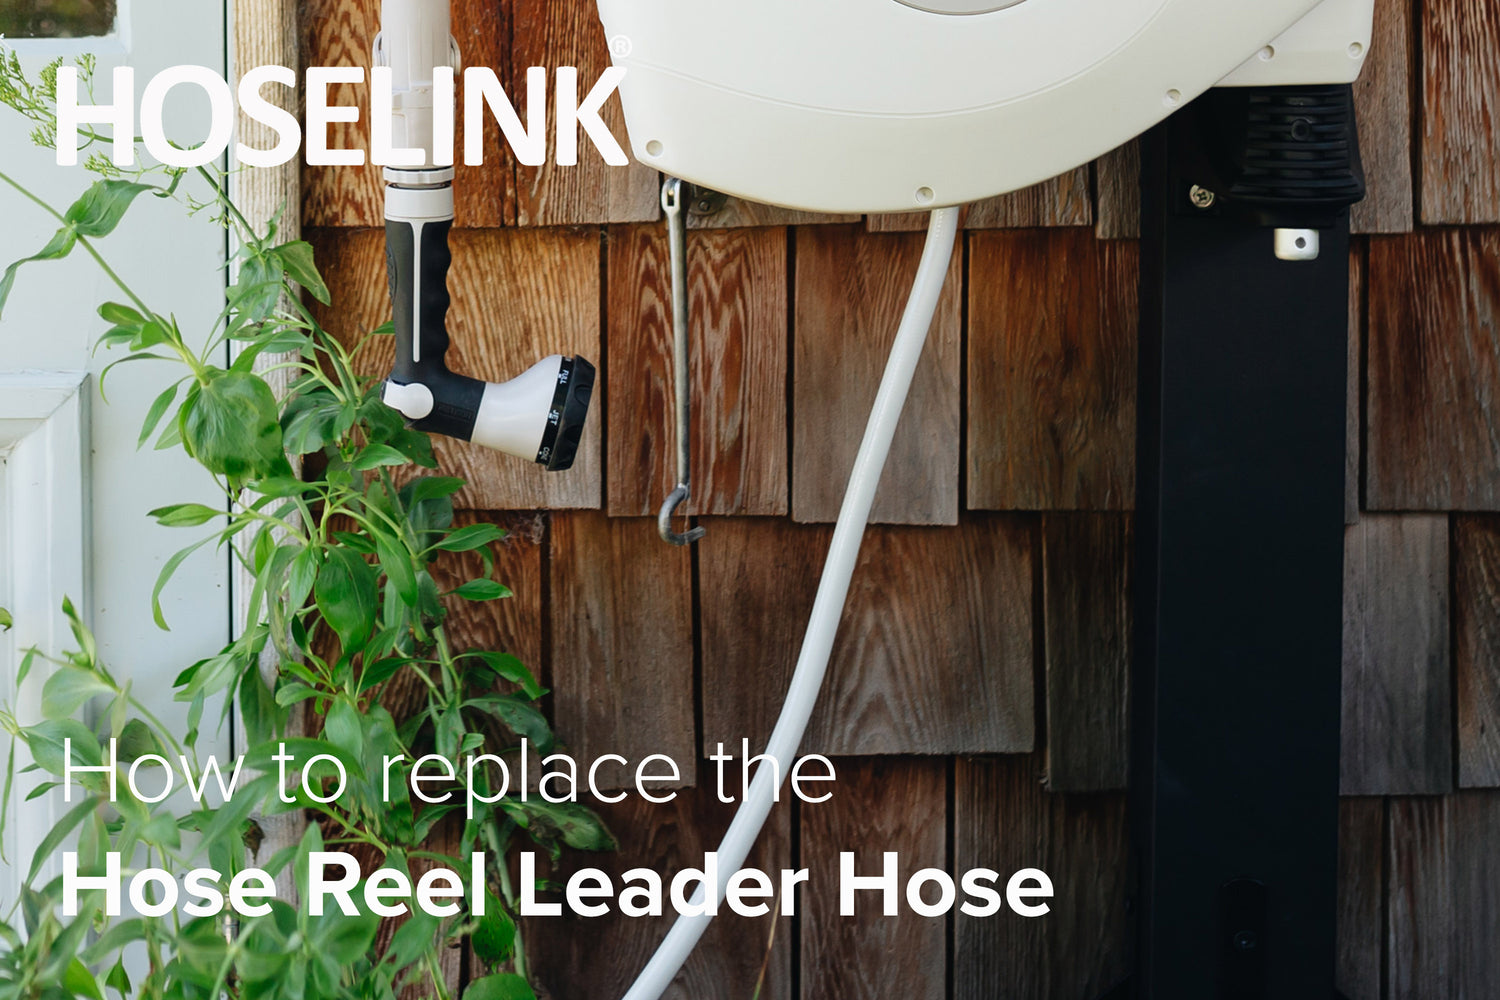 How to replace the Hose Reel Leader Hose